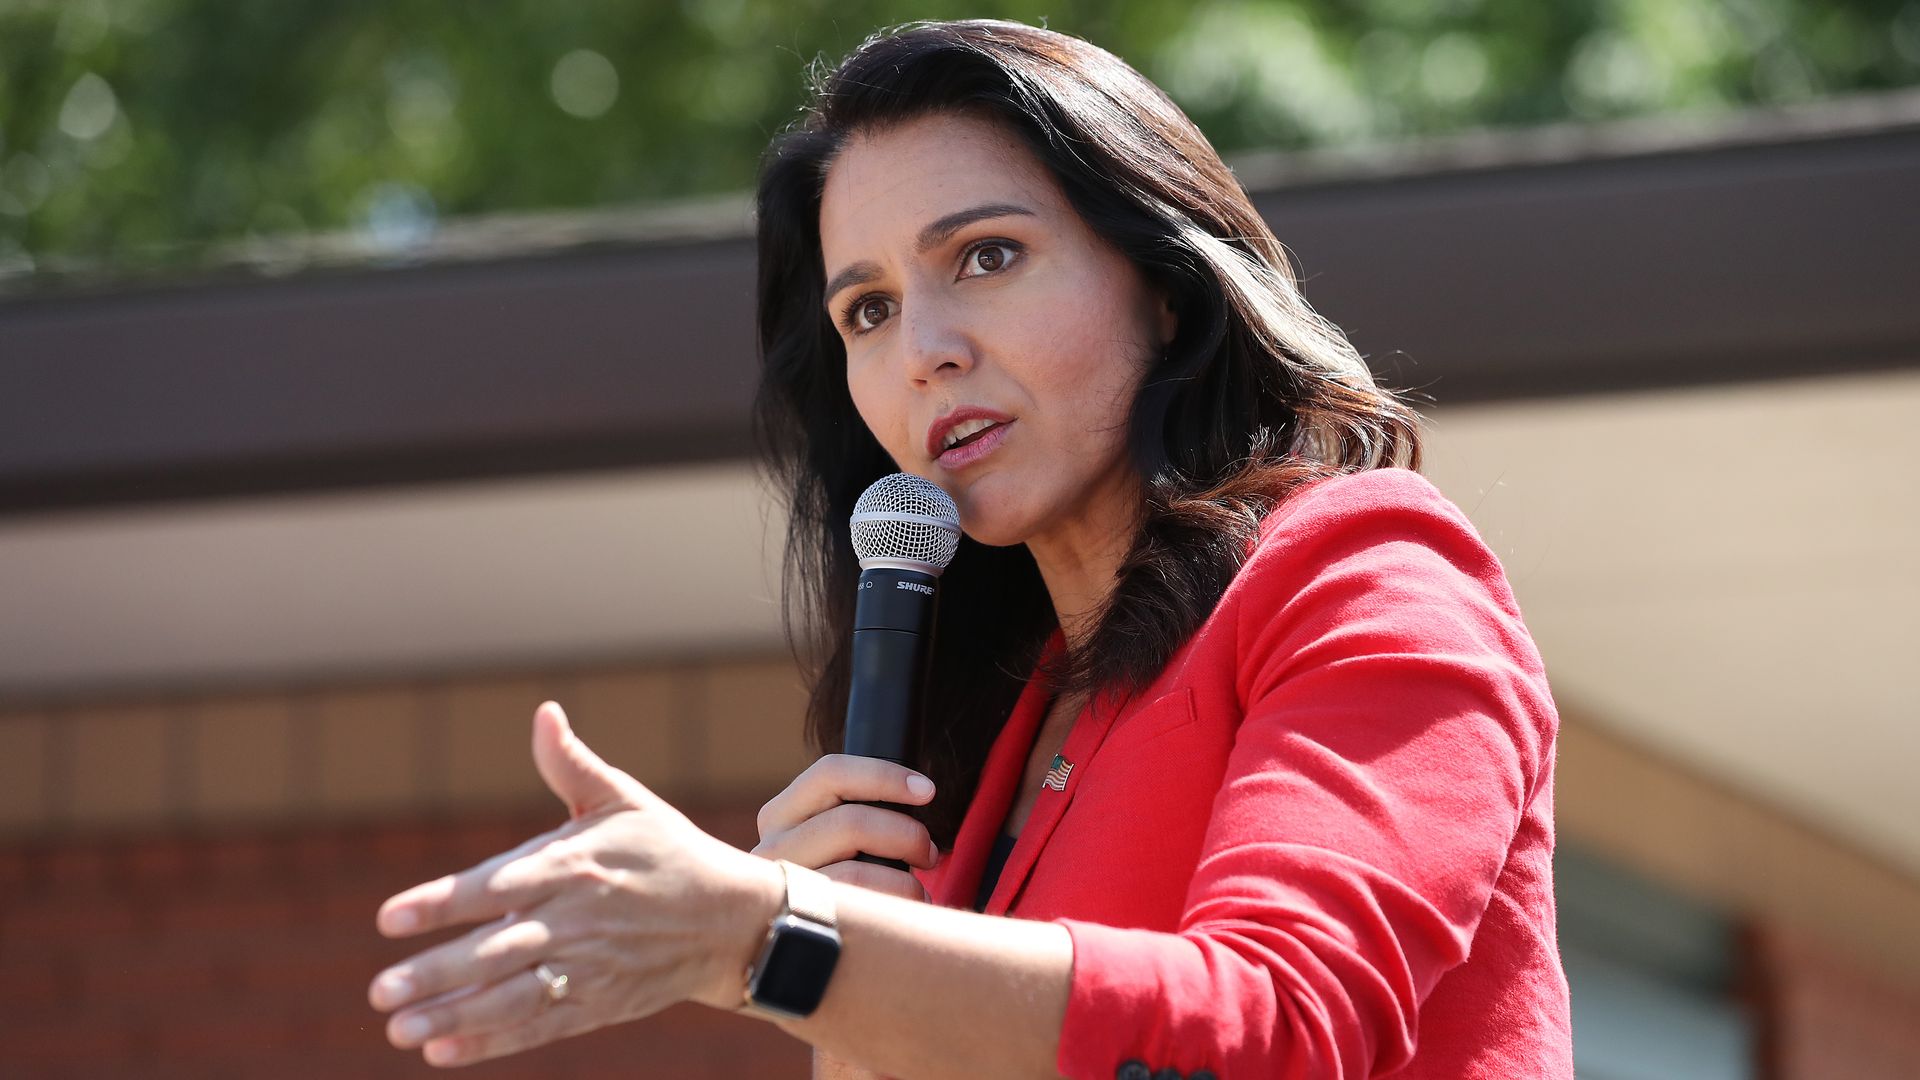 Democratic presidential candidate Rep. Tulsi Gabbard (D-HI) delivers a campaign speech at the Des Moines Register Political Soapbox during the Iowa State Fair 